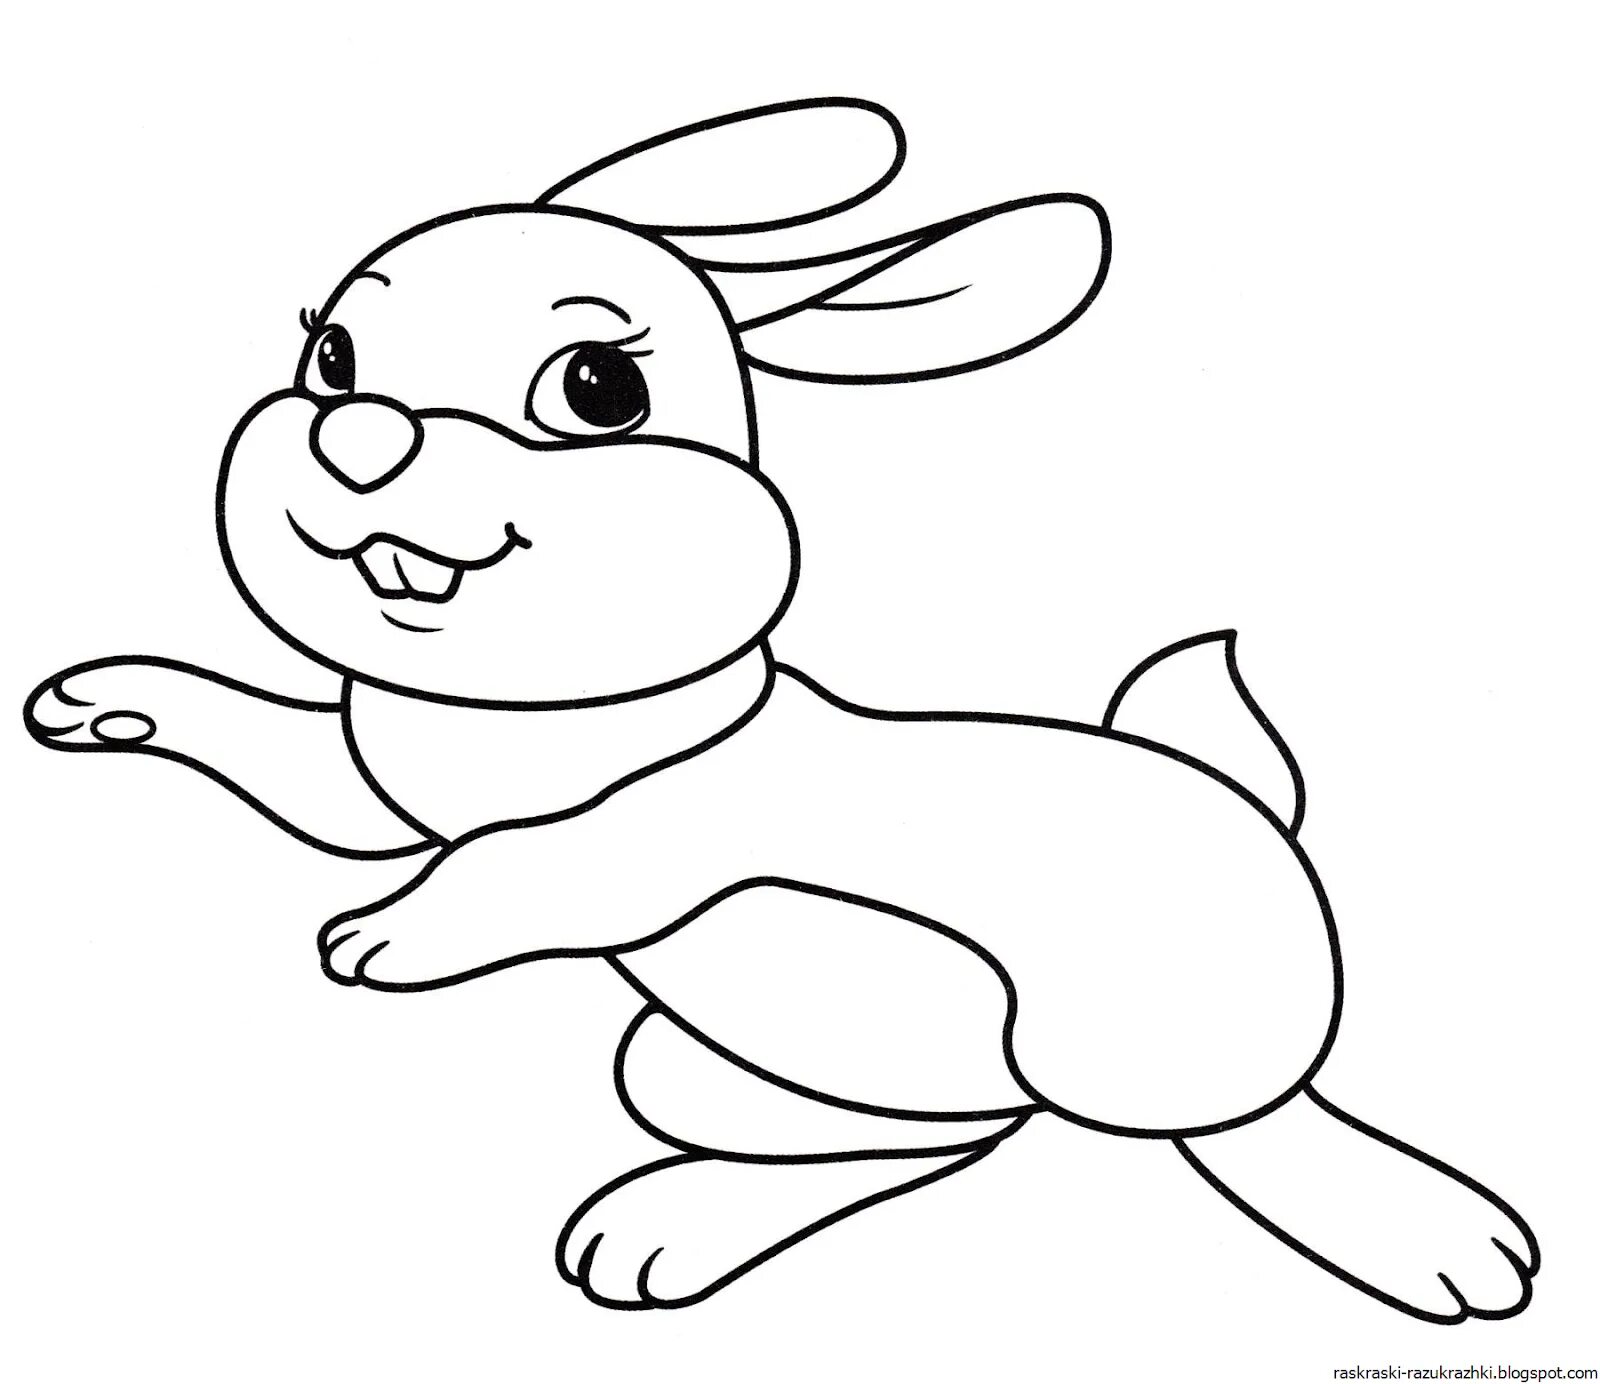 Dazzling Bunny Coloring Page for Toddlers